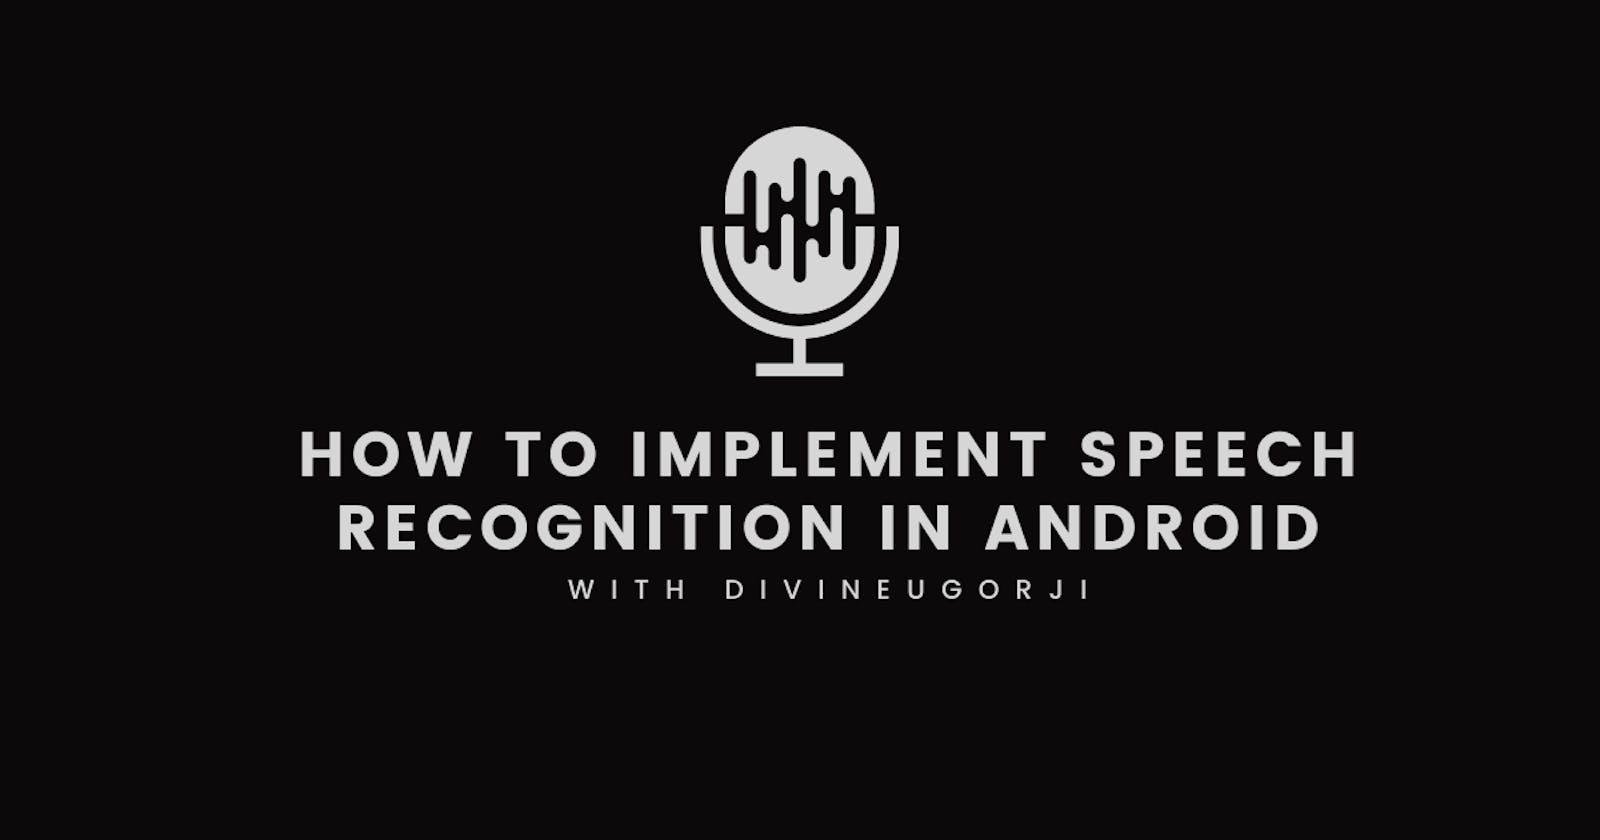 Android Speech To Text Tutorial Using RecognizerIntent API